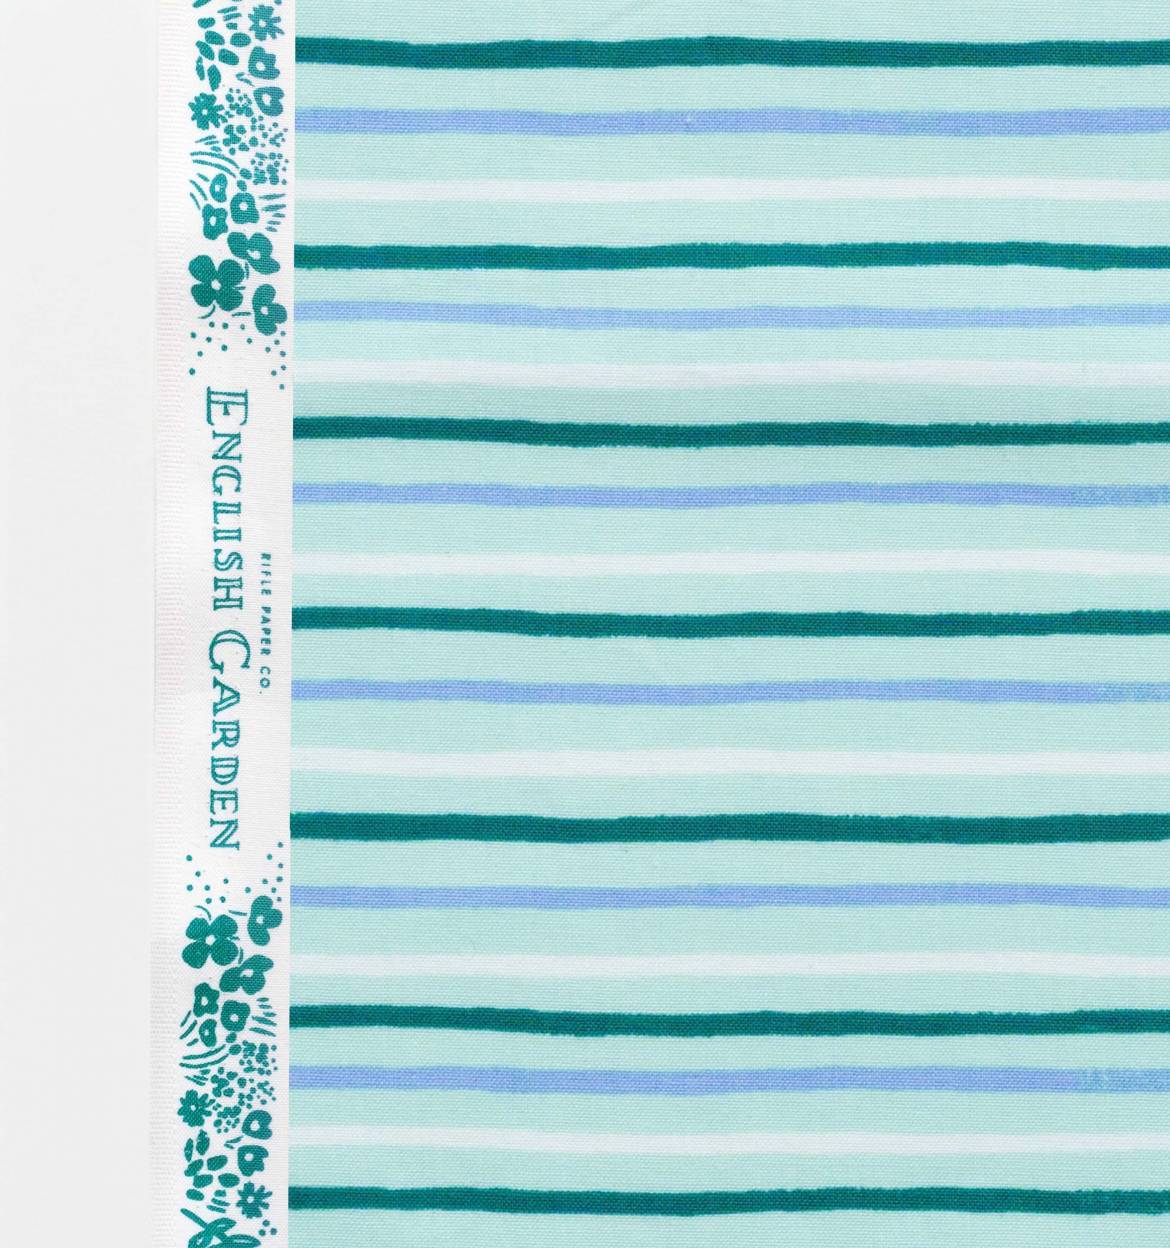 English Garden - Painted Stripes in Mint